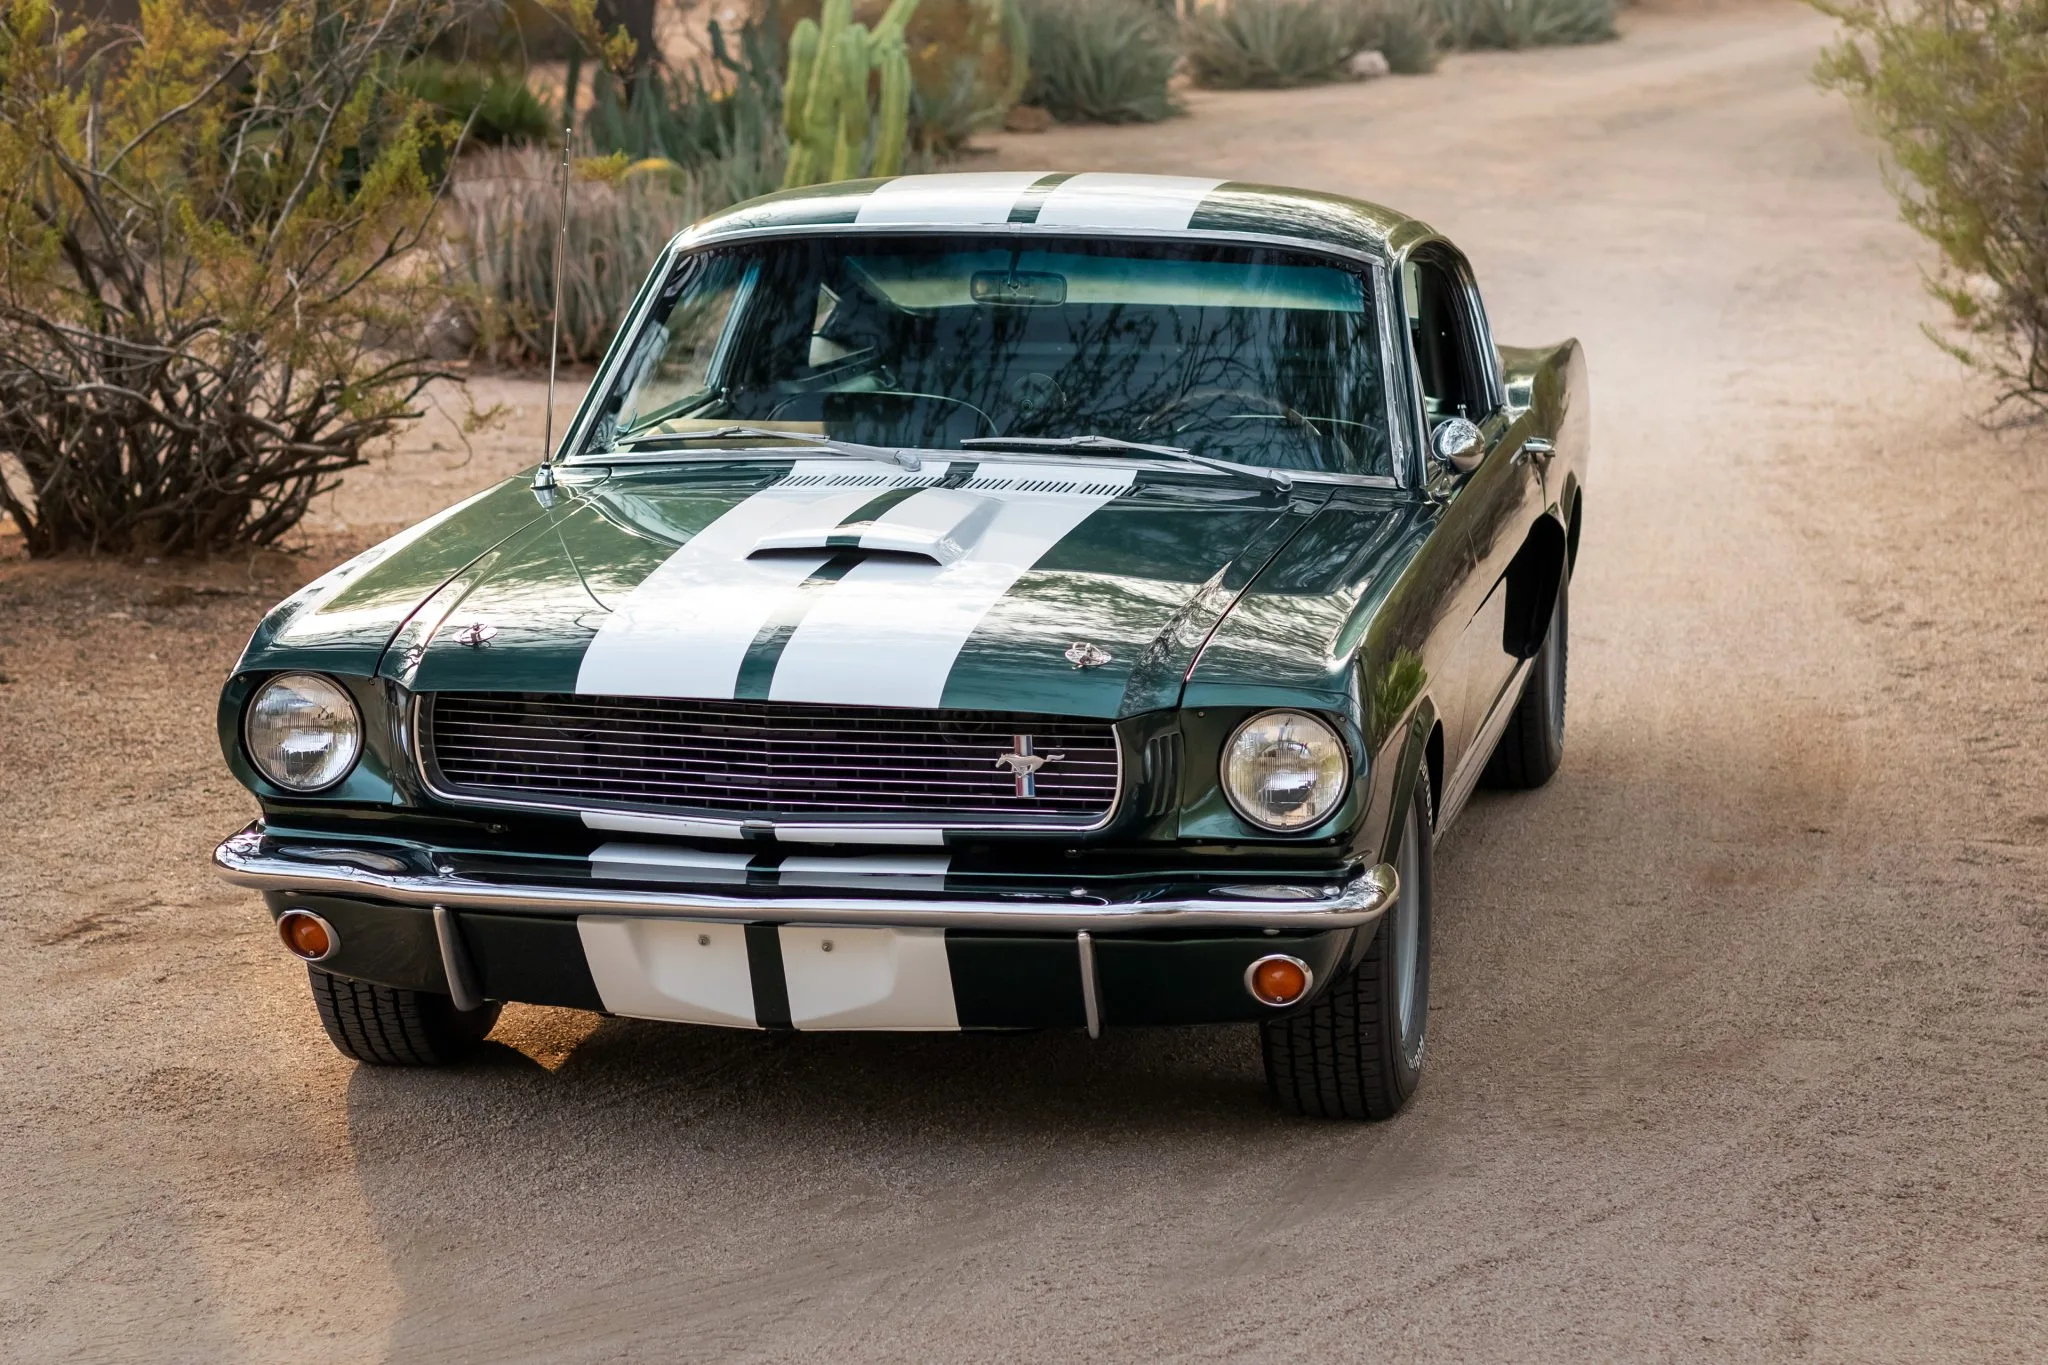 FOR SALE: Ivy Green 1966 Shelby Mustang GT350, Auctions, Bring A Trailer, For Sale, Shelby, Shelby GT350